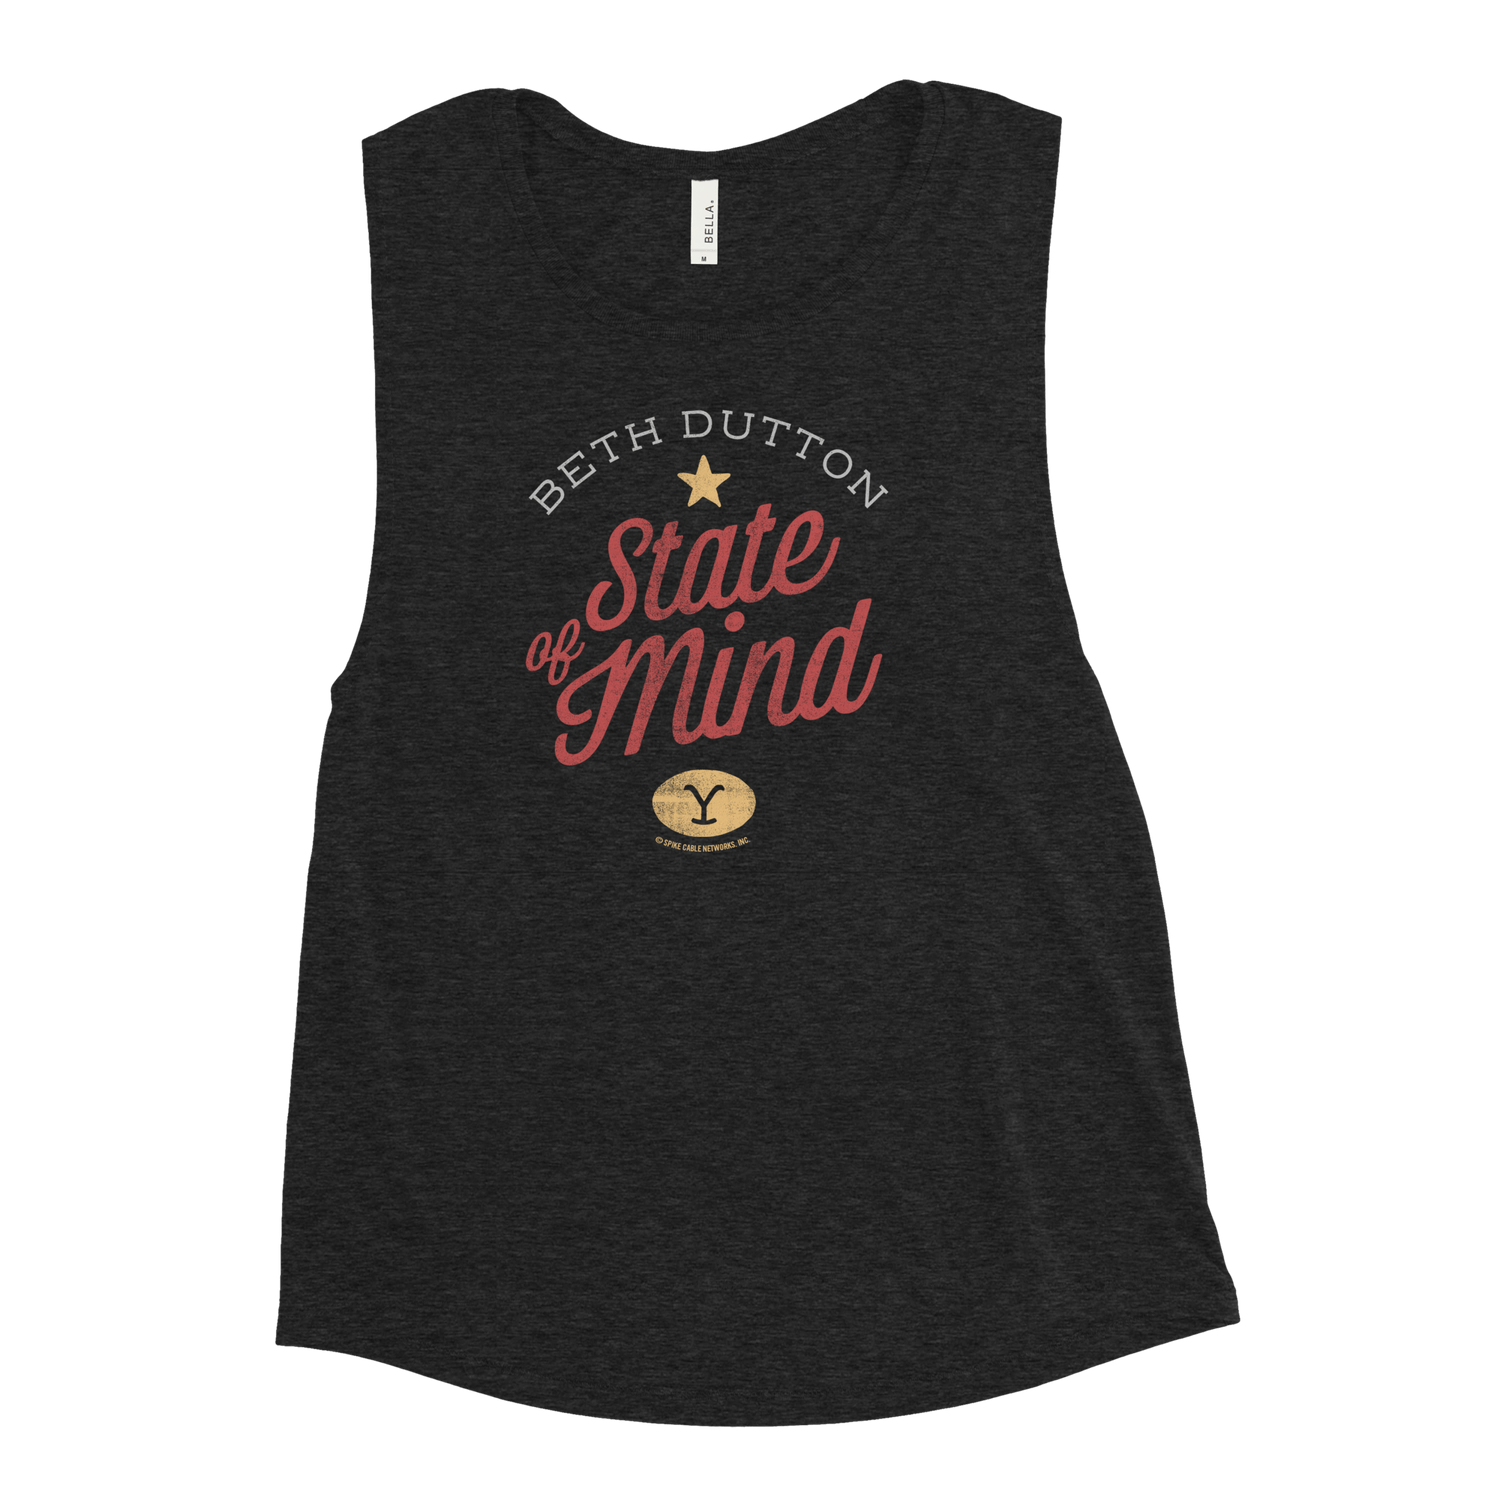 Yellowstone Beth Dutton State of Mind Women's Muscle Tank Top - Paramount Shop